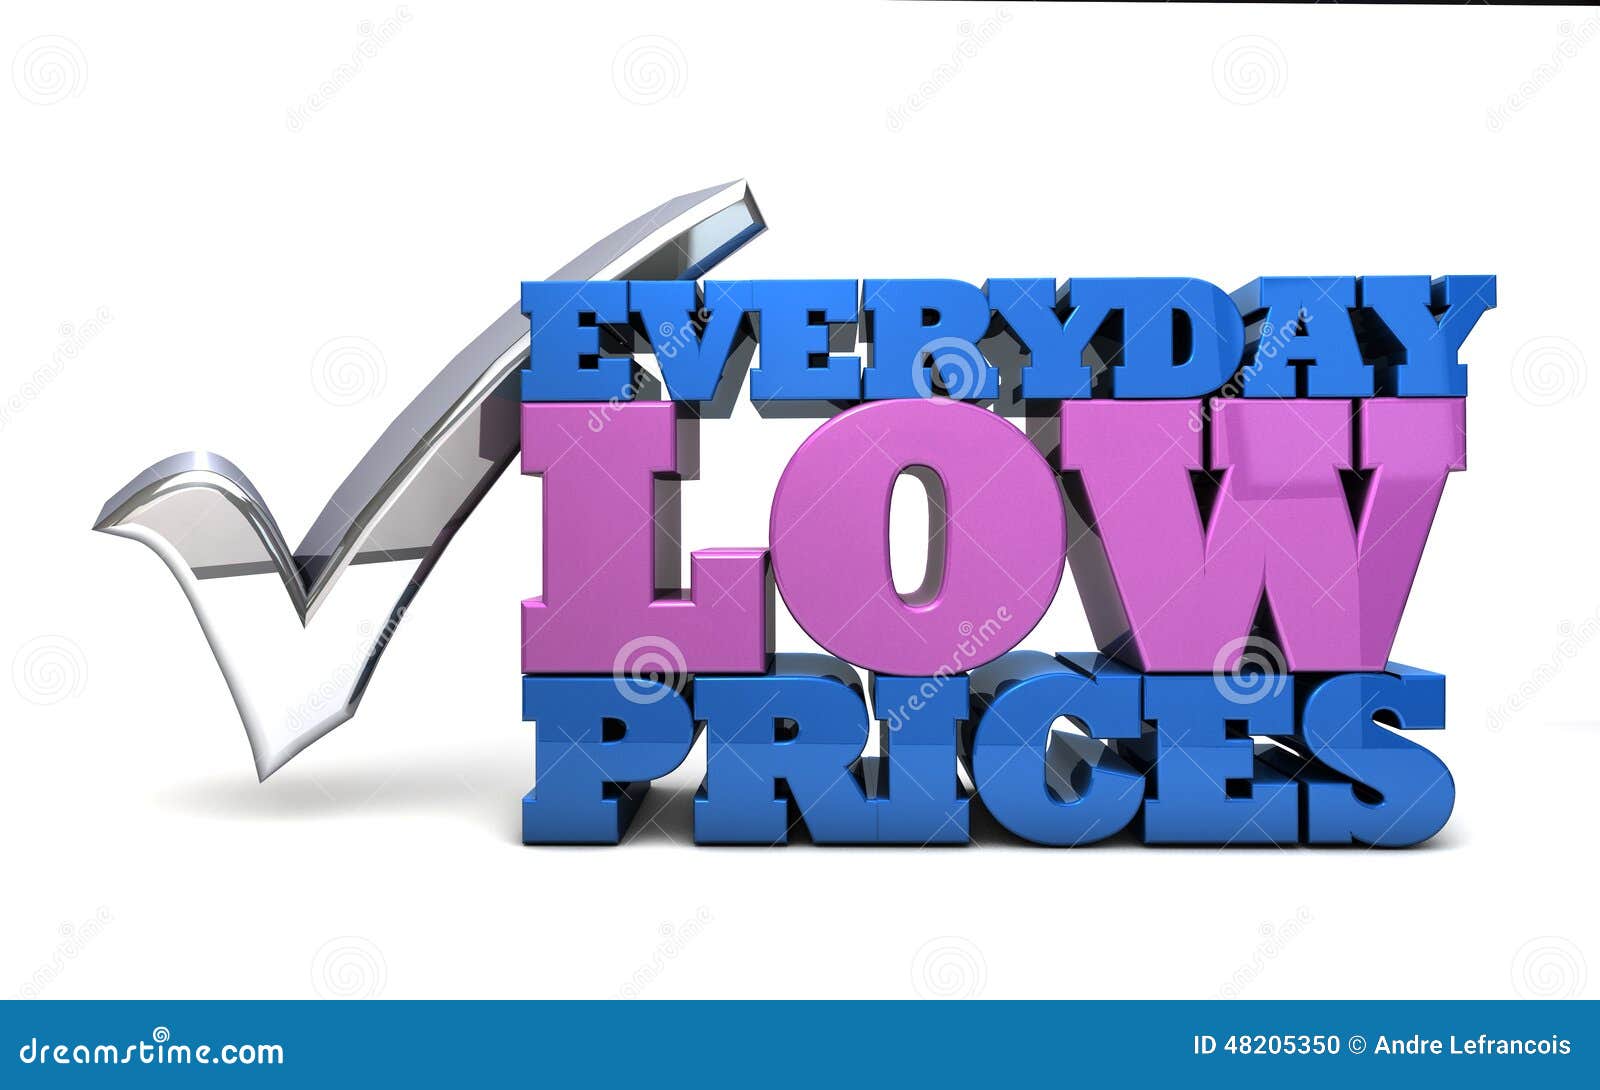 Everyday Lower Price - Offers